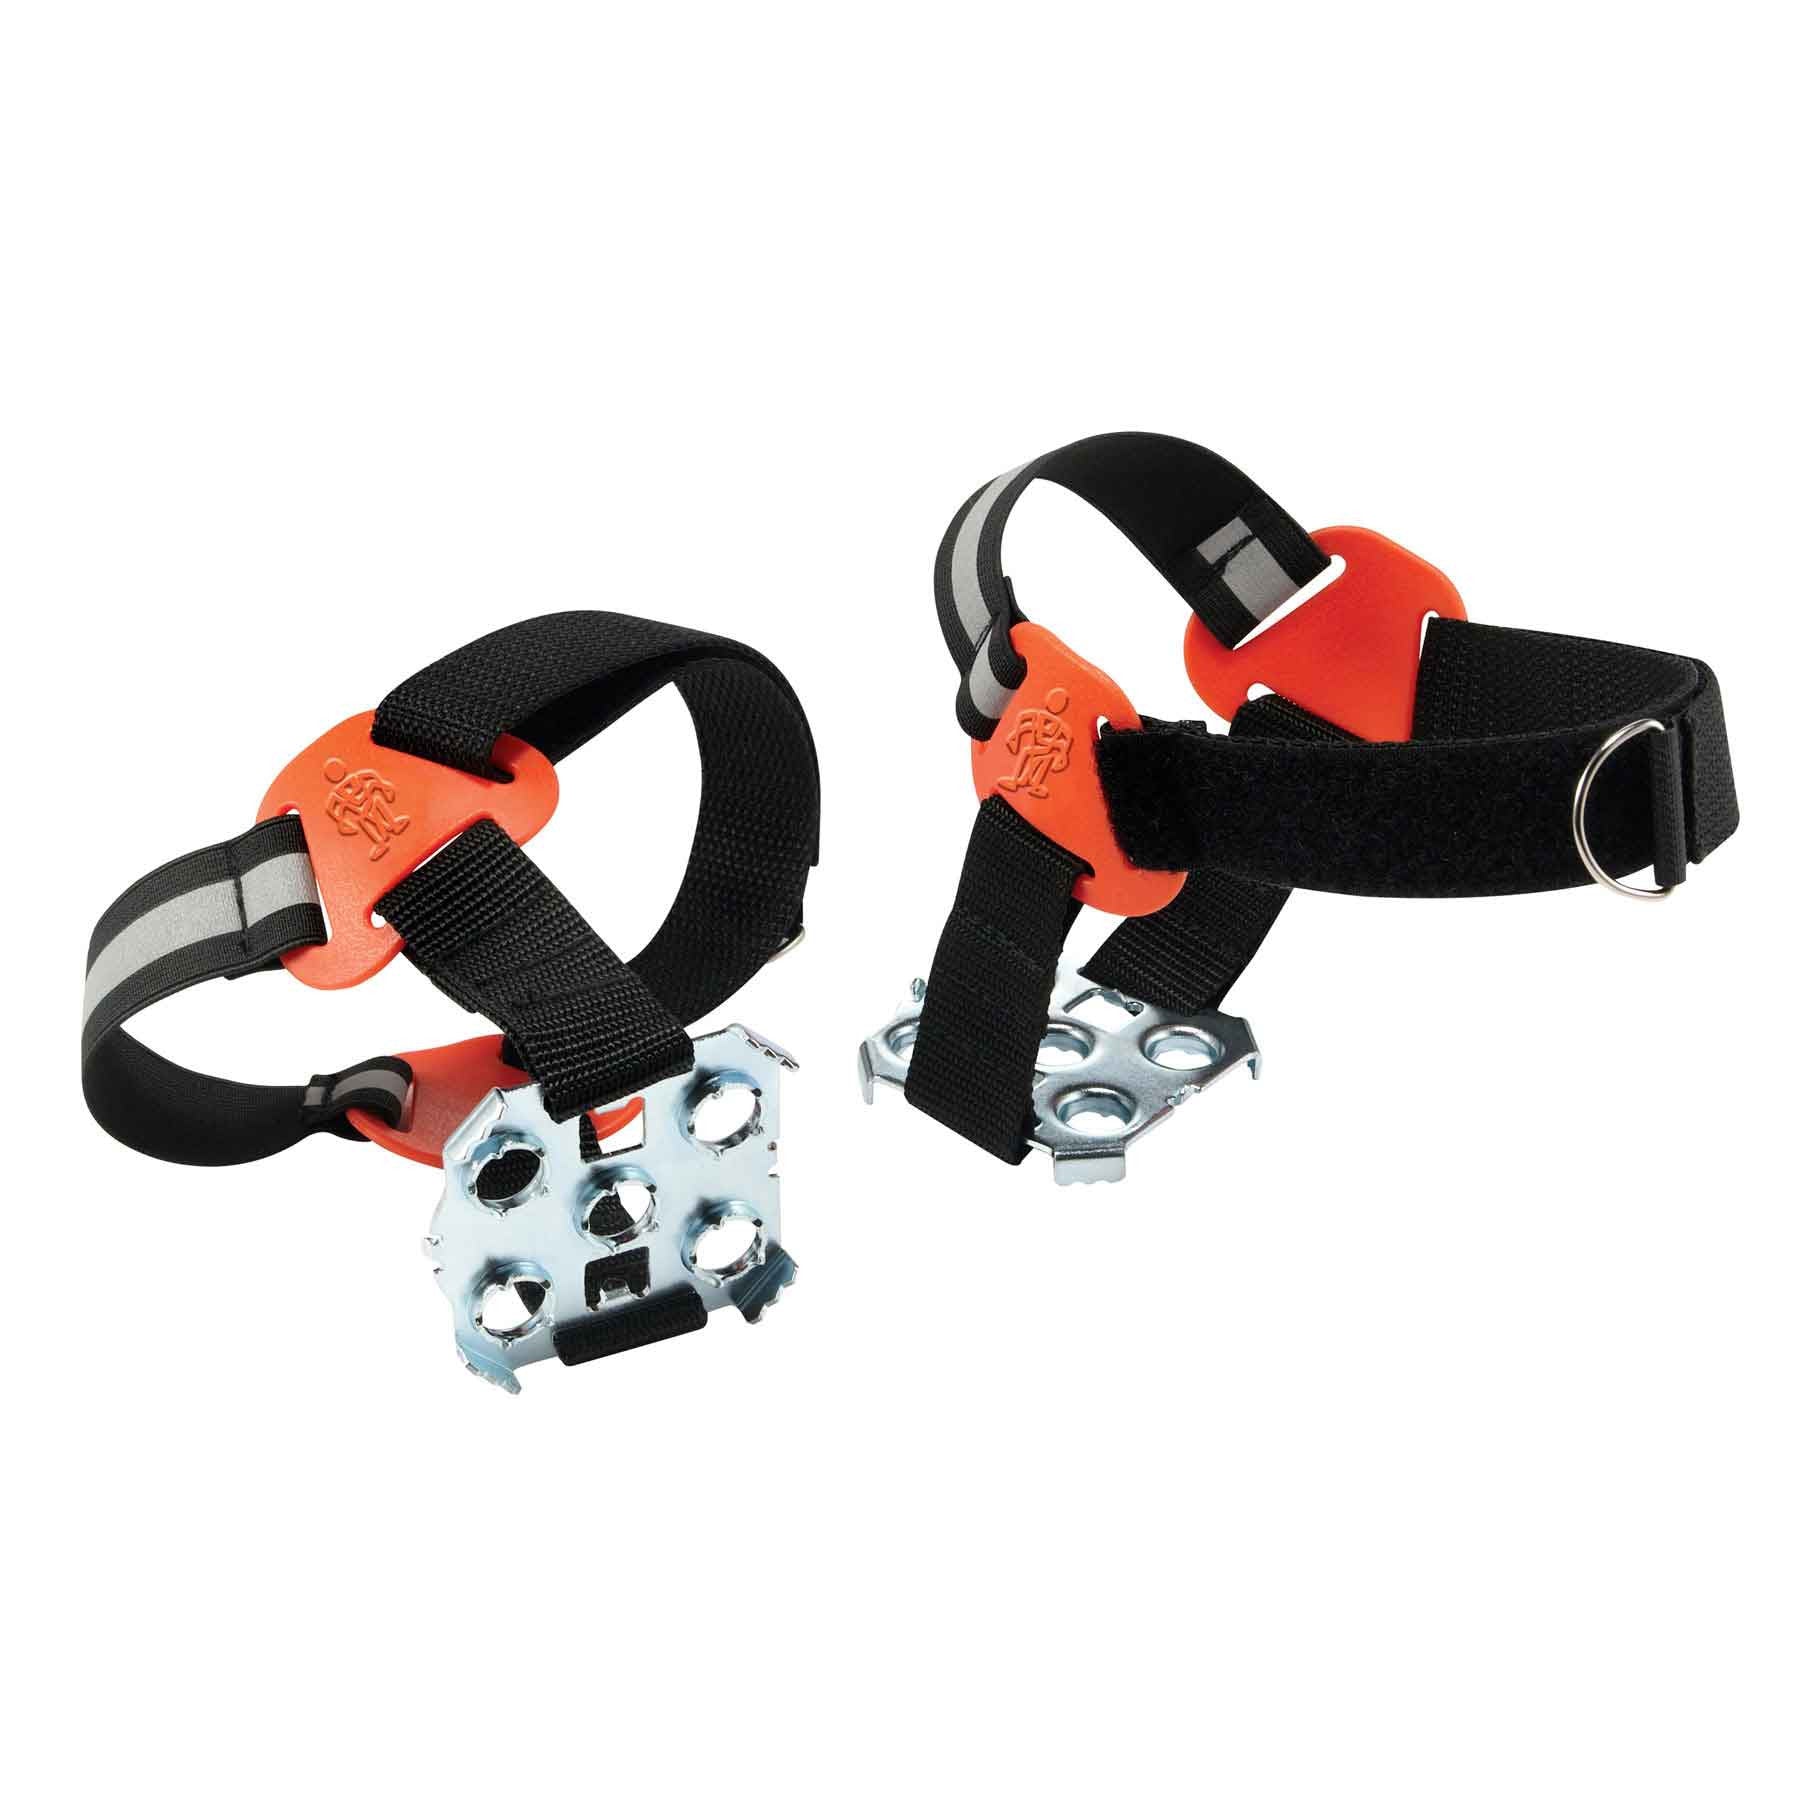 TREX 6315 Strap-On Heel Ice Traction Device